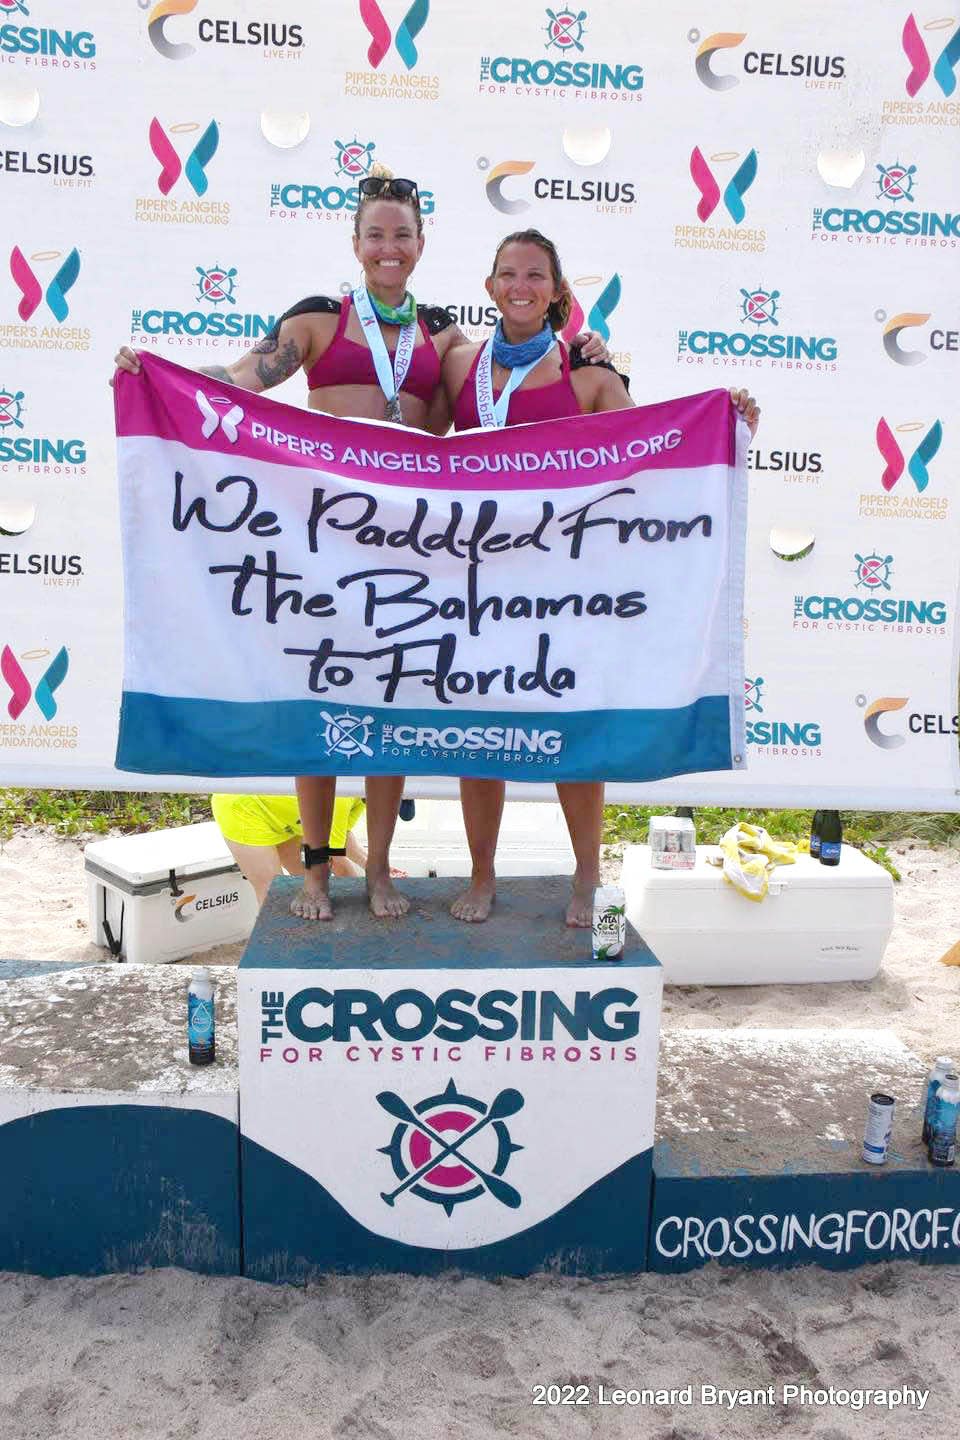 Holly Heidenreich, right, a firefighter and EMT with the Destin Fire Control District, and her teammate, Megan Scully from Lake Worth, pose for a picture after paddling 80 miles from Bimini, Bahamas to the mainland of Florida in last month's 2022 Crossing For Cystic Fibrosis challenge.